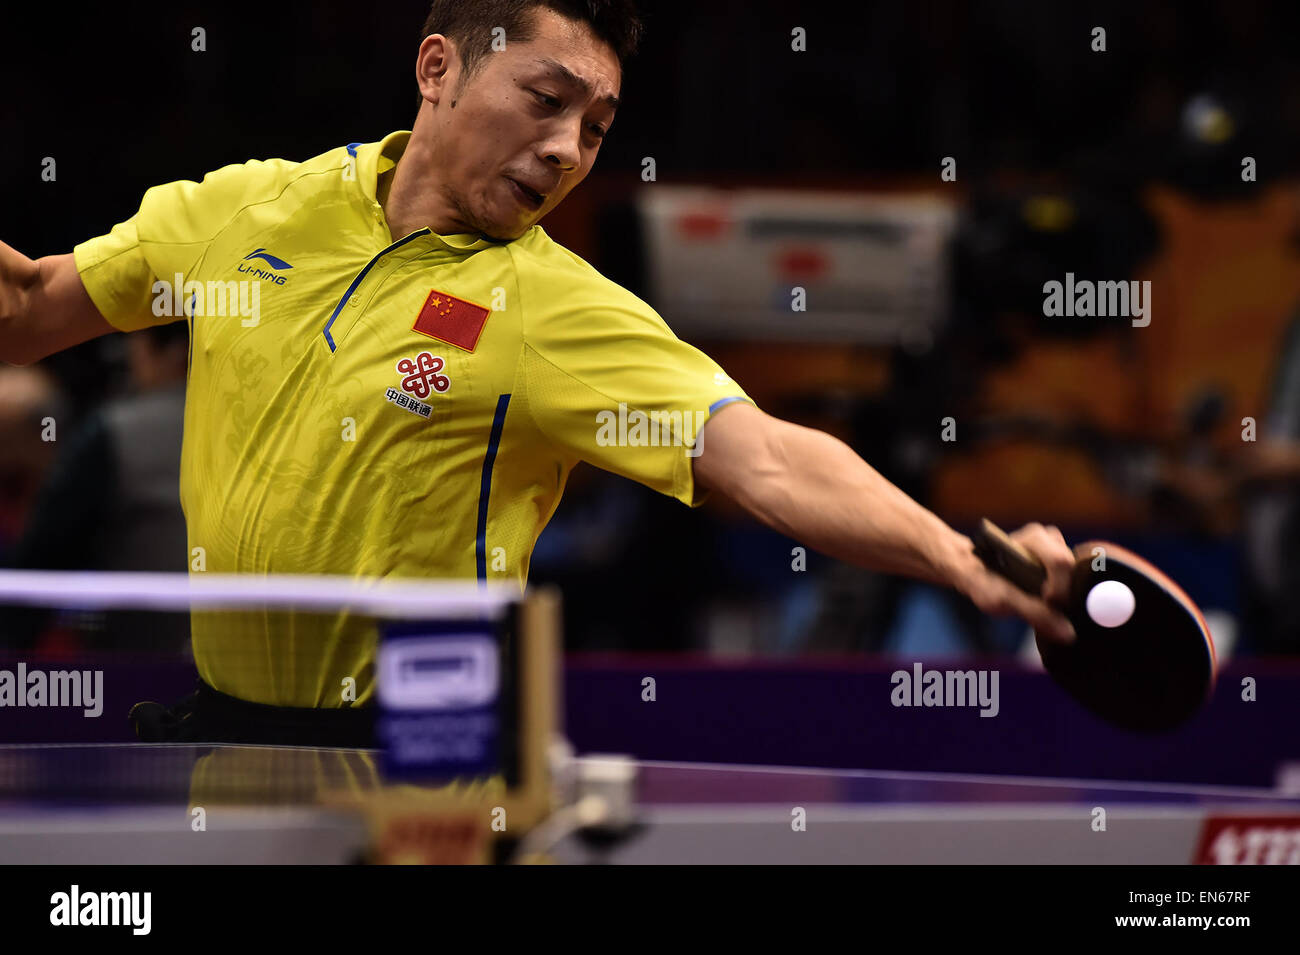 Suzhou, China's Jiangsu Province. 29th Apr, 2015. China's Xu Xin competes against Choe Il from the Democratic People's Republic of Korea (DPRK) during the Men's Singles match at the 53rd Table Tennis World Championships in Suzhou, city of east China's Jiangsu Province, on April 29, 2015. China's Xu Xin won 4-0. © Han Yuqing/Xinhua/Alamy Live News Stock Photo